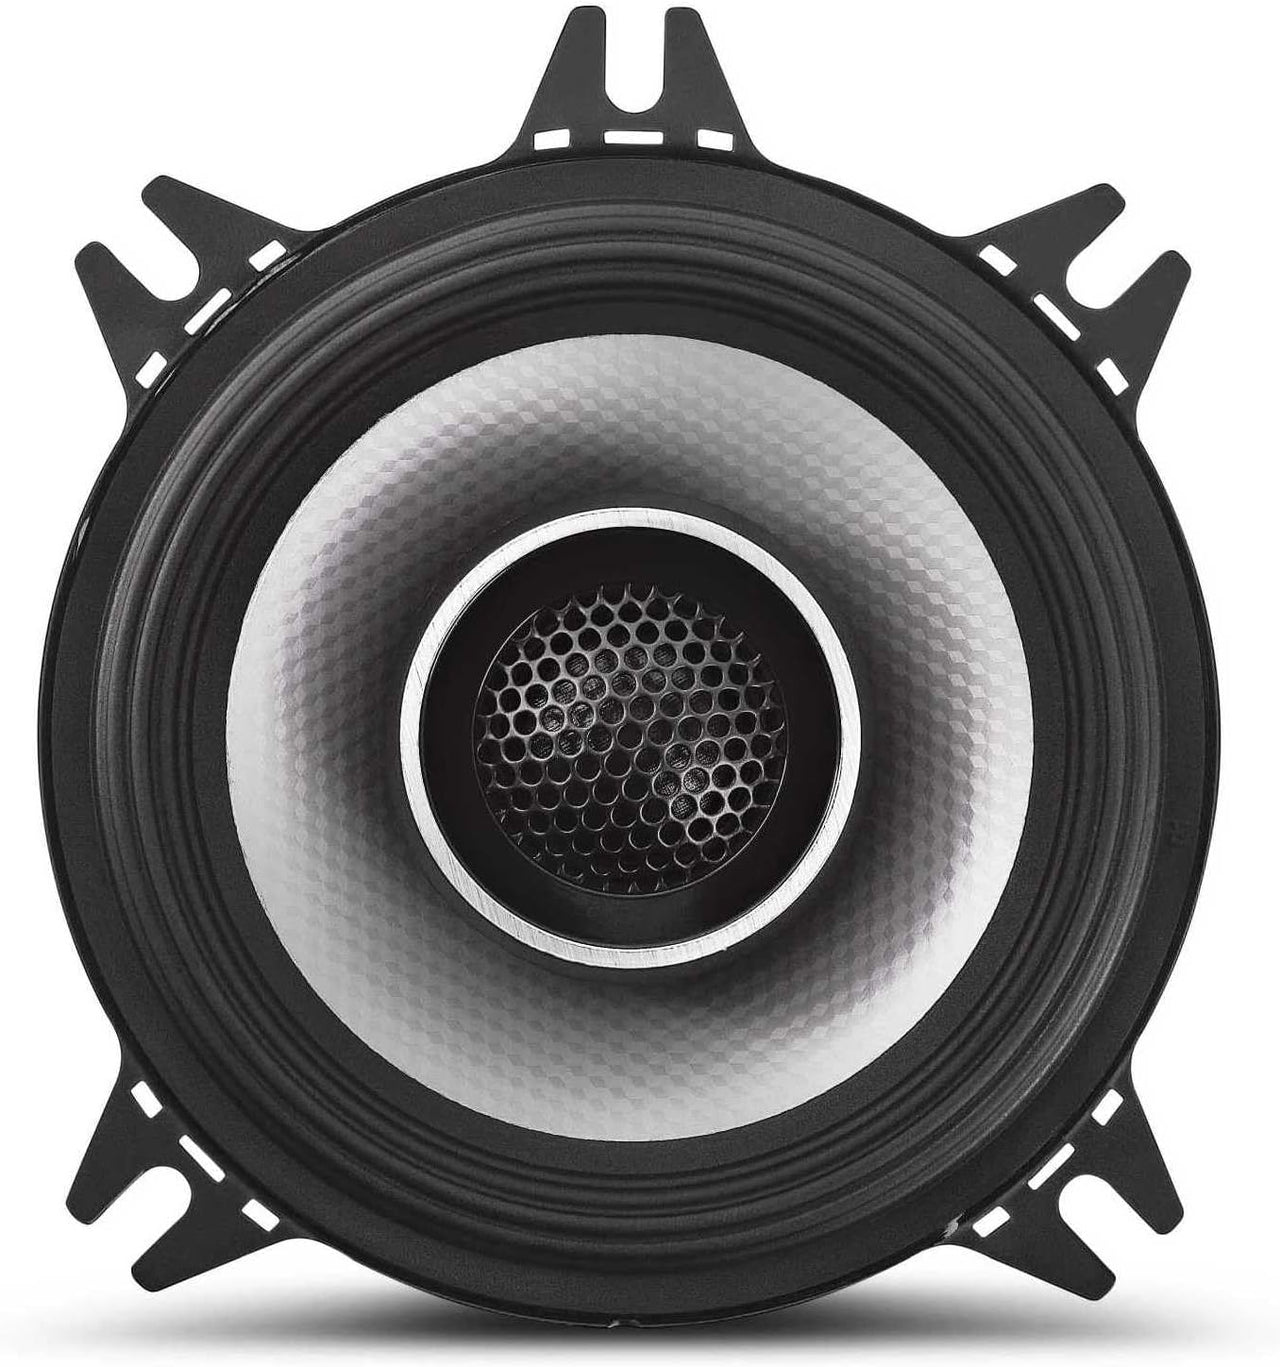 2 Alpine S-S40 Car Speaker 280W Max (90W RMS) 4" Type S Series 2-Way Coaxial Car Speakers, Contains 4x6" Adapter Plate